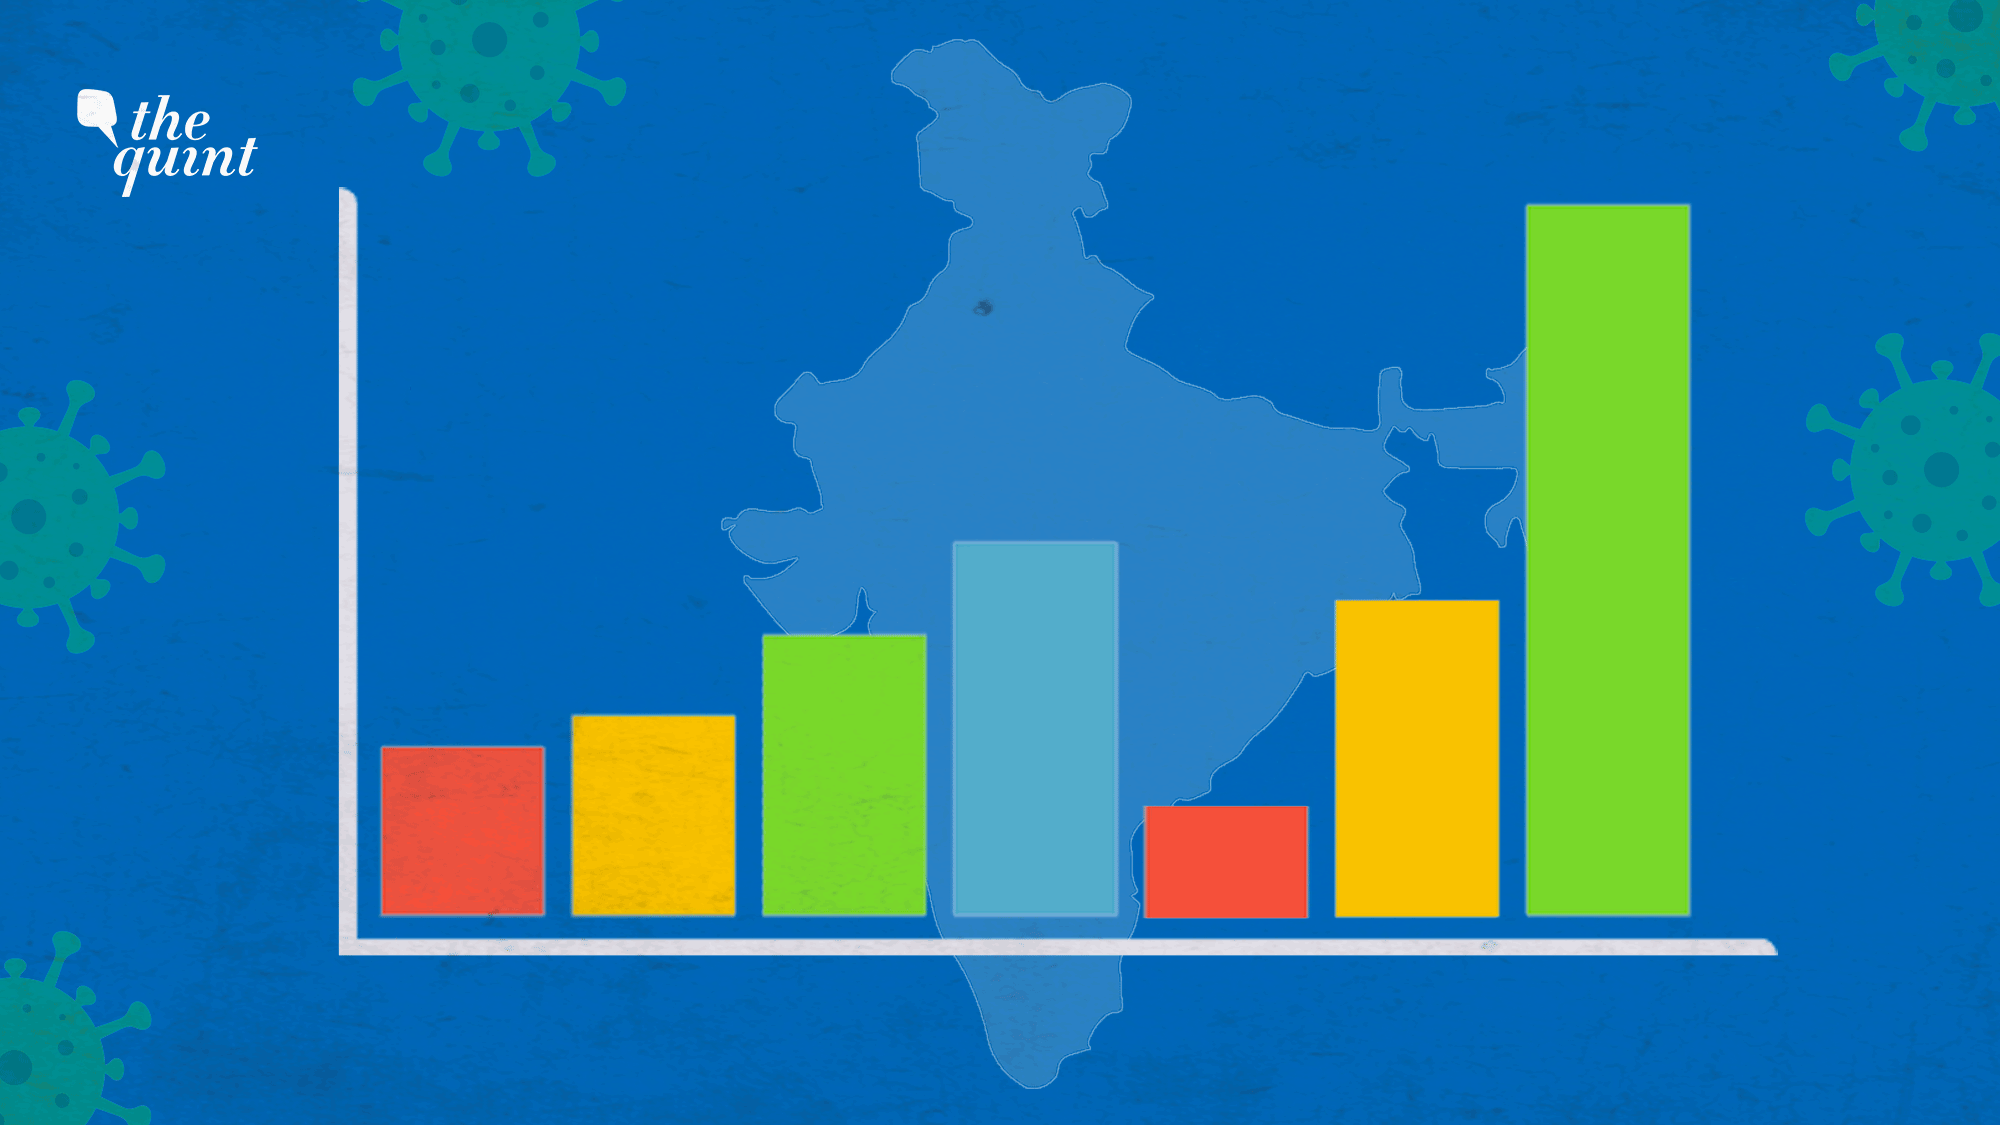 While individual statistics do serve a purpose, they often don’t reveal the larger story. So, The Quint has attempted a compare the COVID-19 situation across eight major cities along various key parameters.